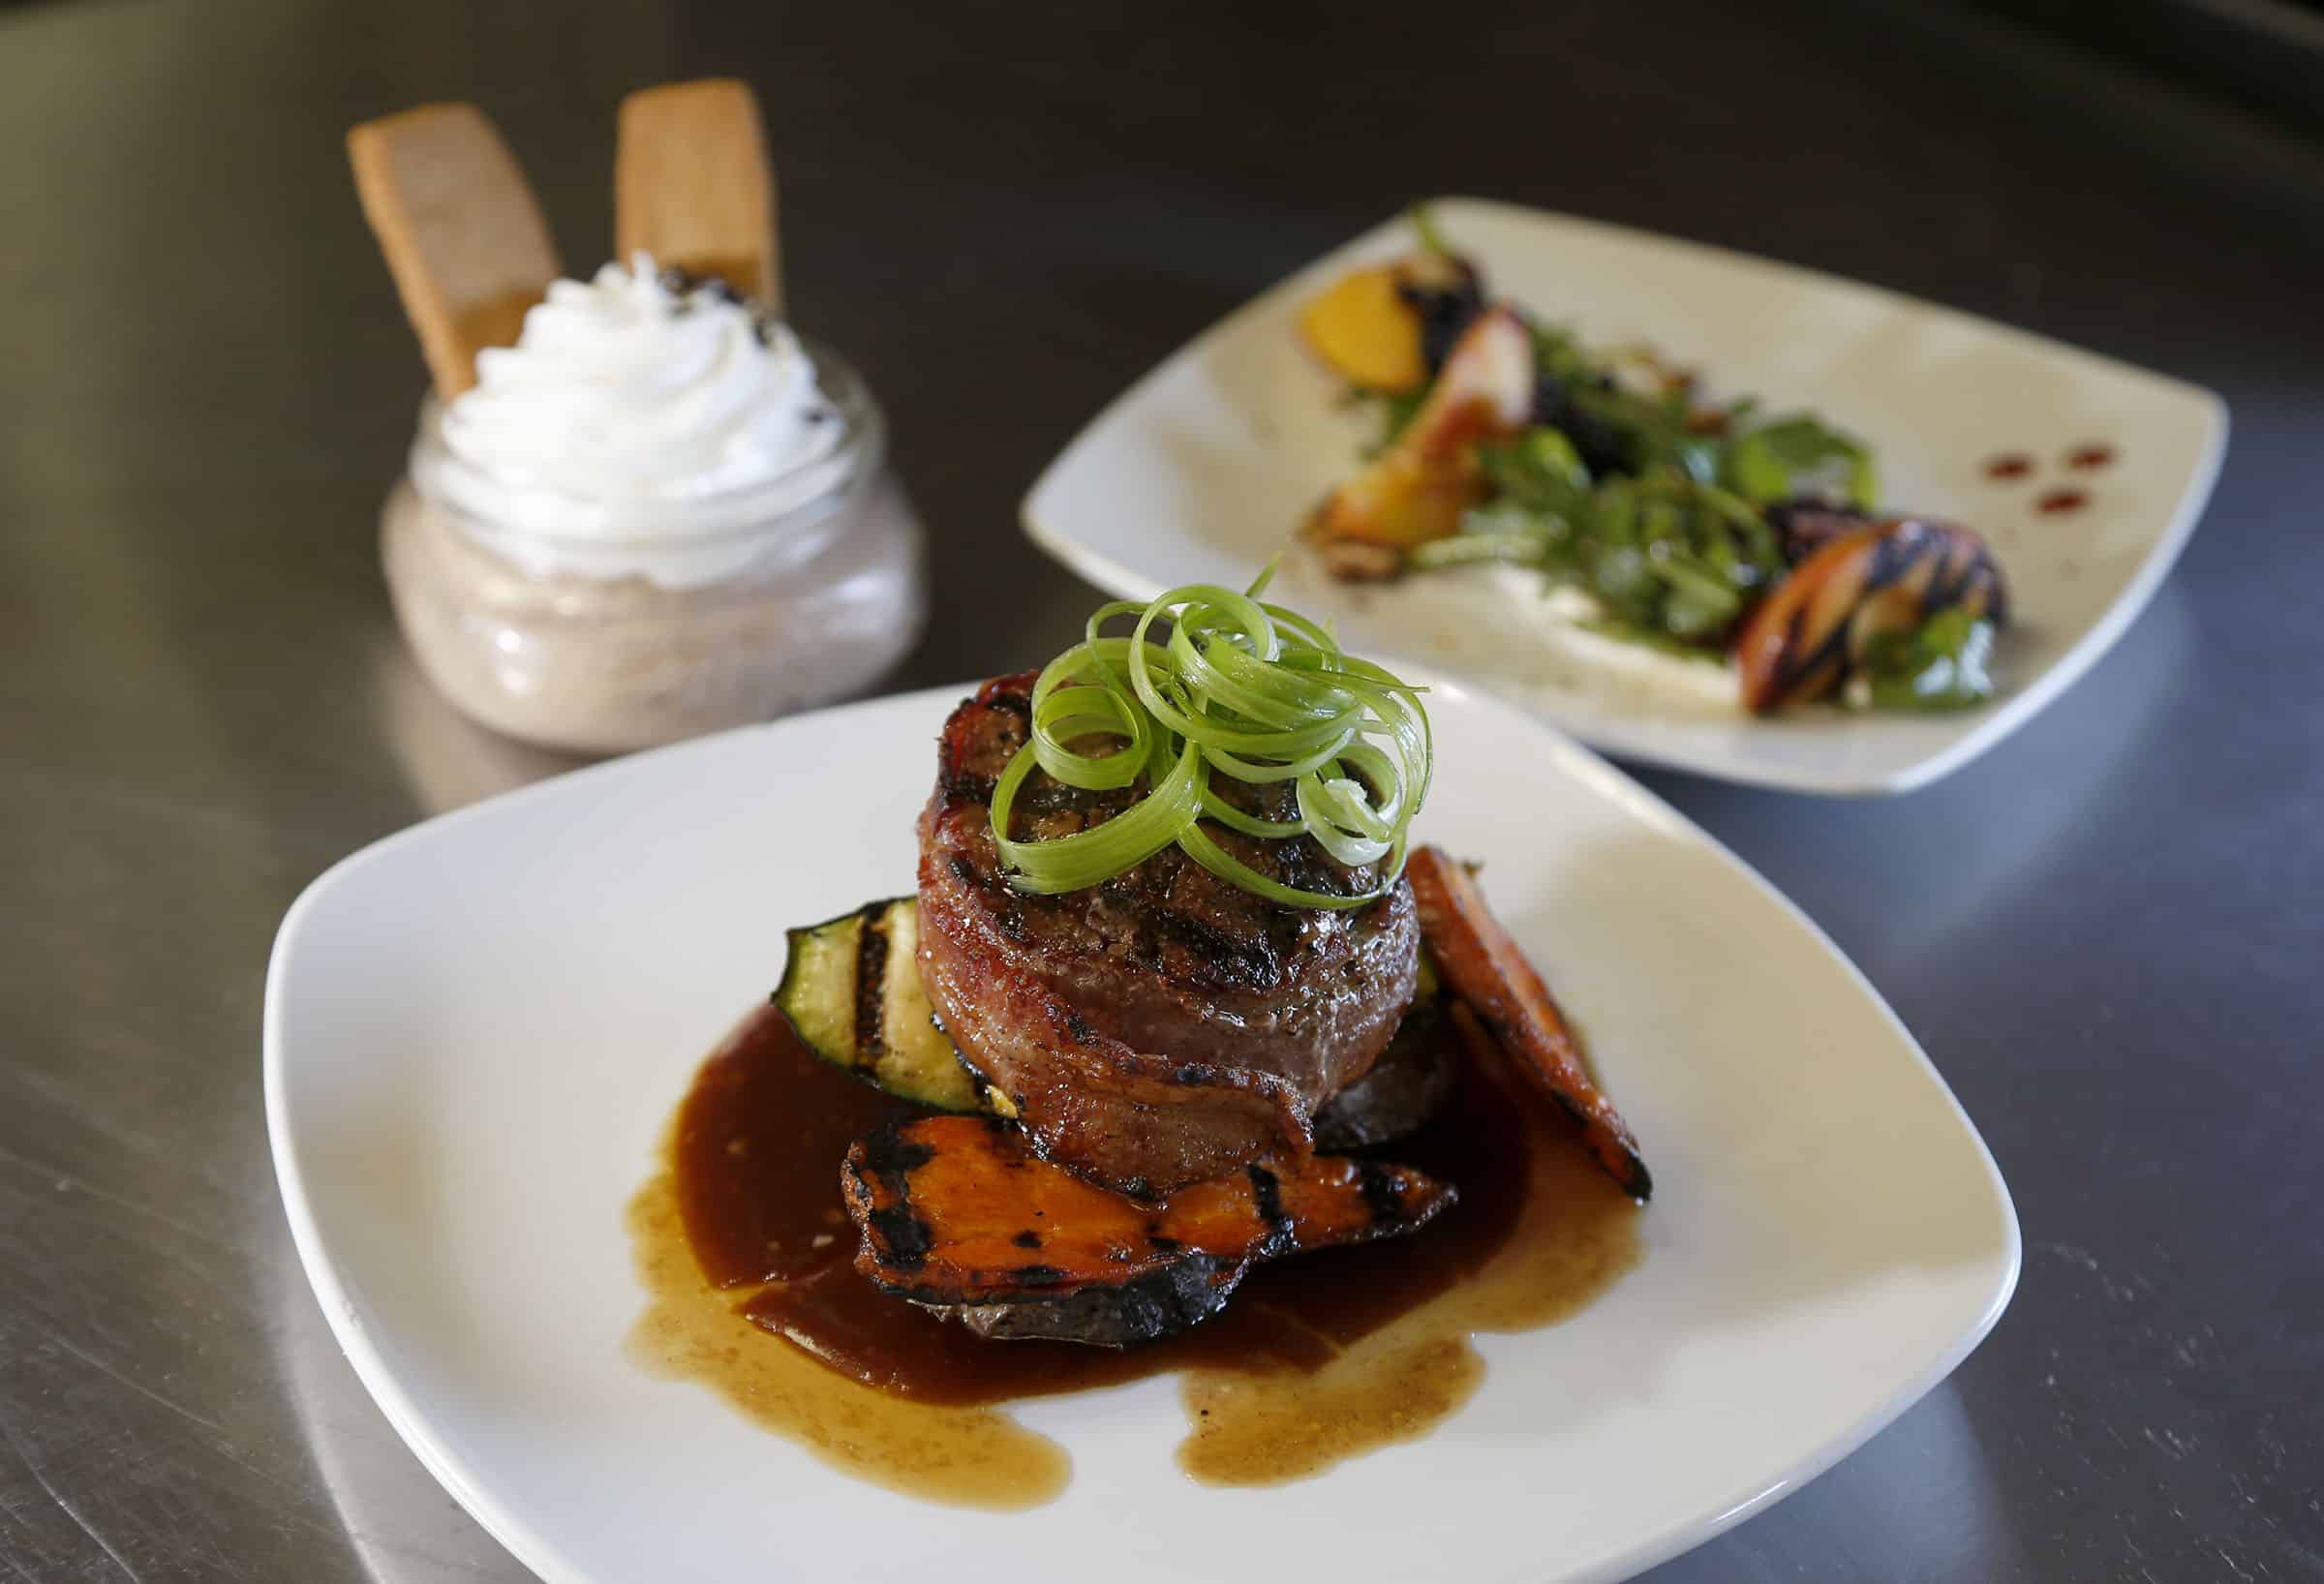 Boston Grill and Deli Thursday Night Special for this month is a filet mignon, nectarine and a smore dessert in Tulsa, OK, June 20, 2019. STEPHEN PINGRY/Tulsa World